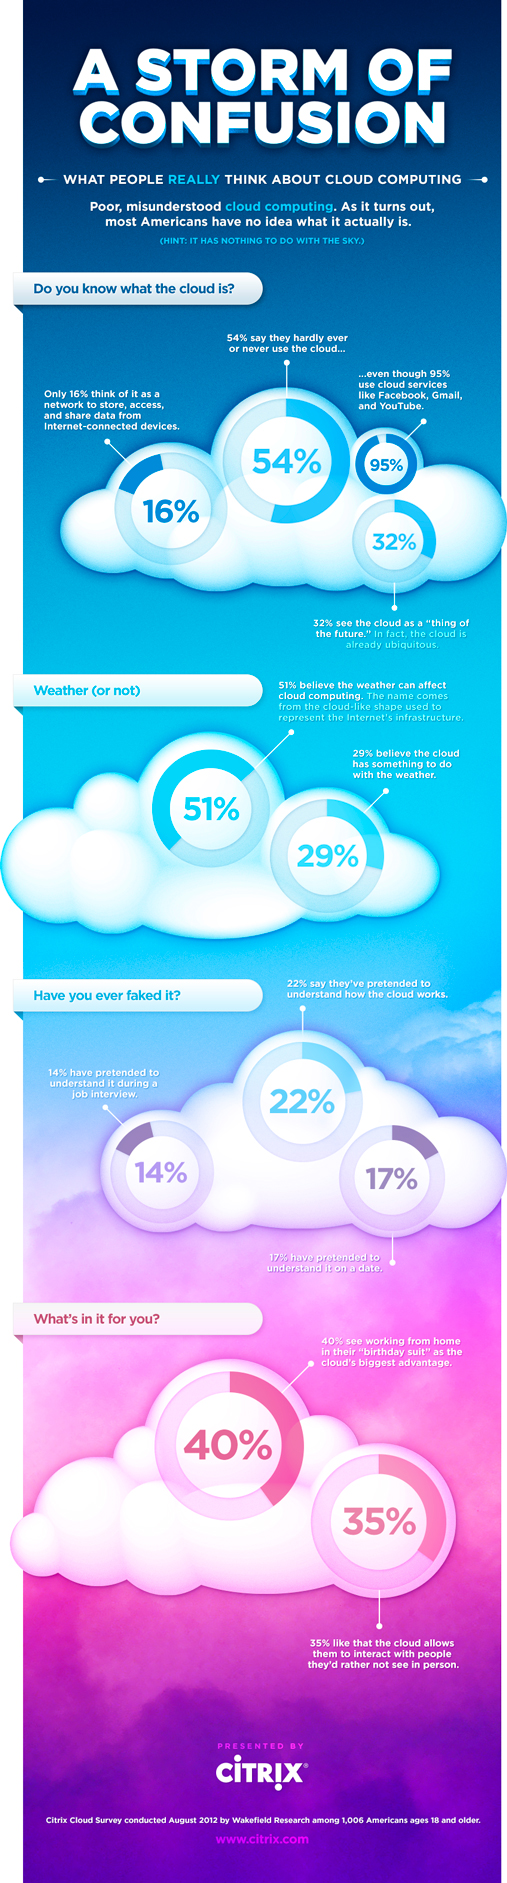 Cloud Computing benefits- Are you faking it? Green Cloud Hosting